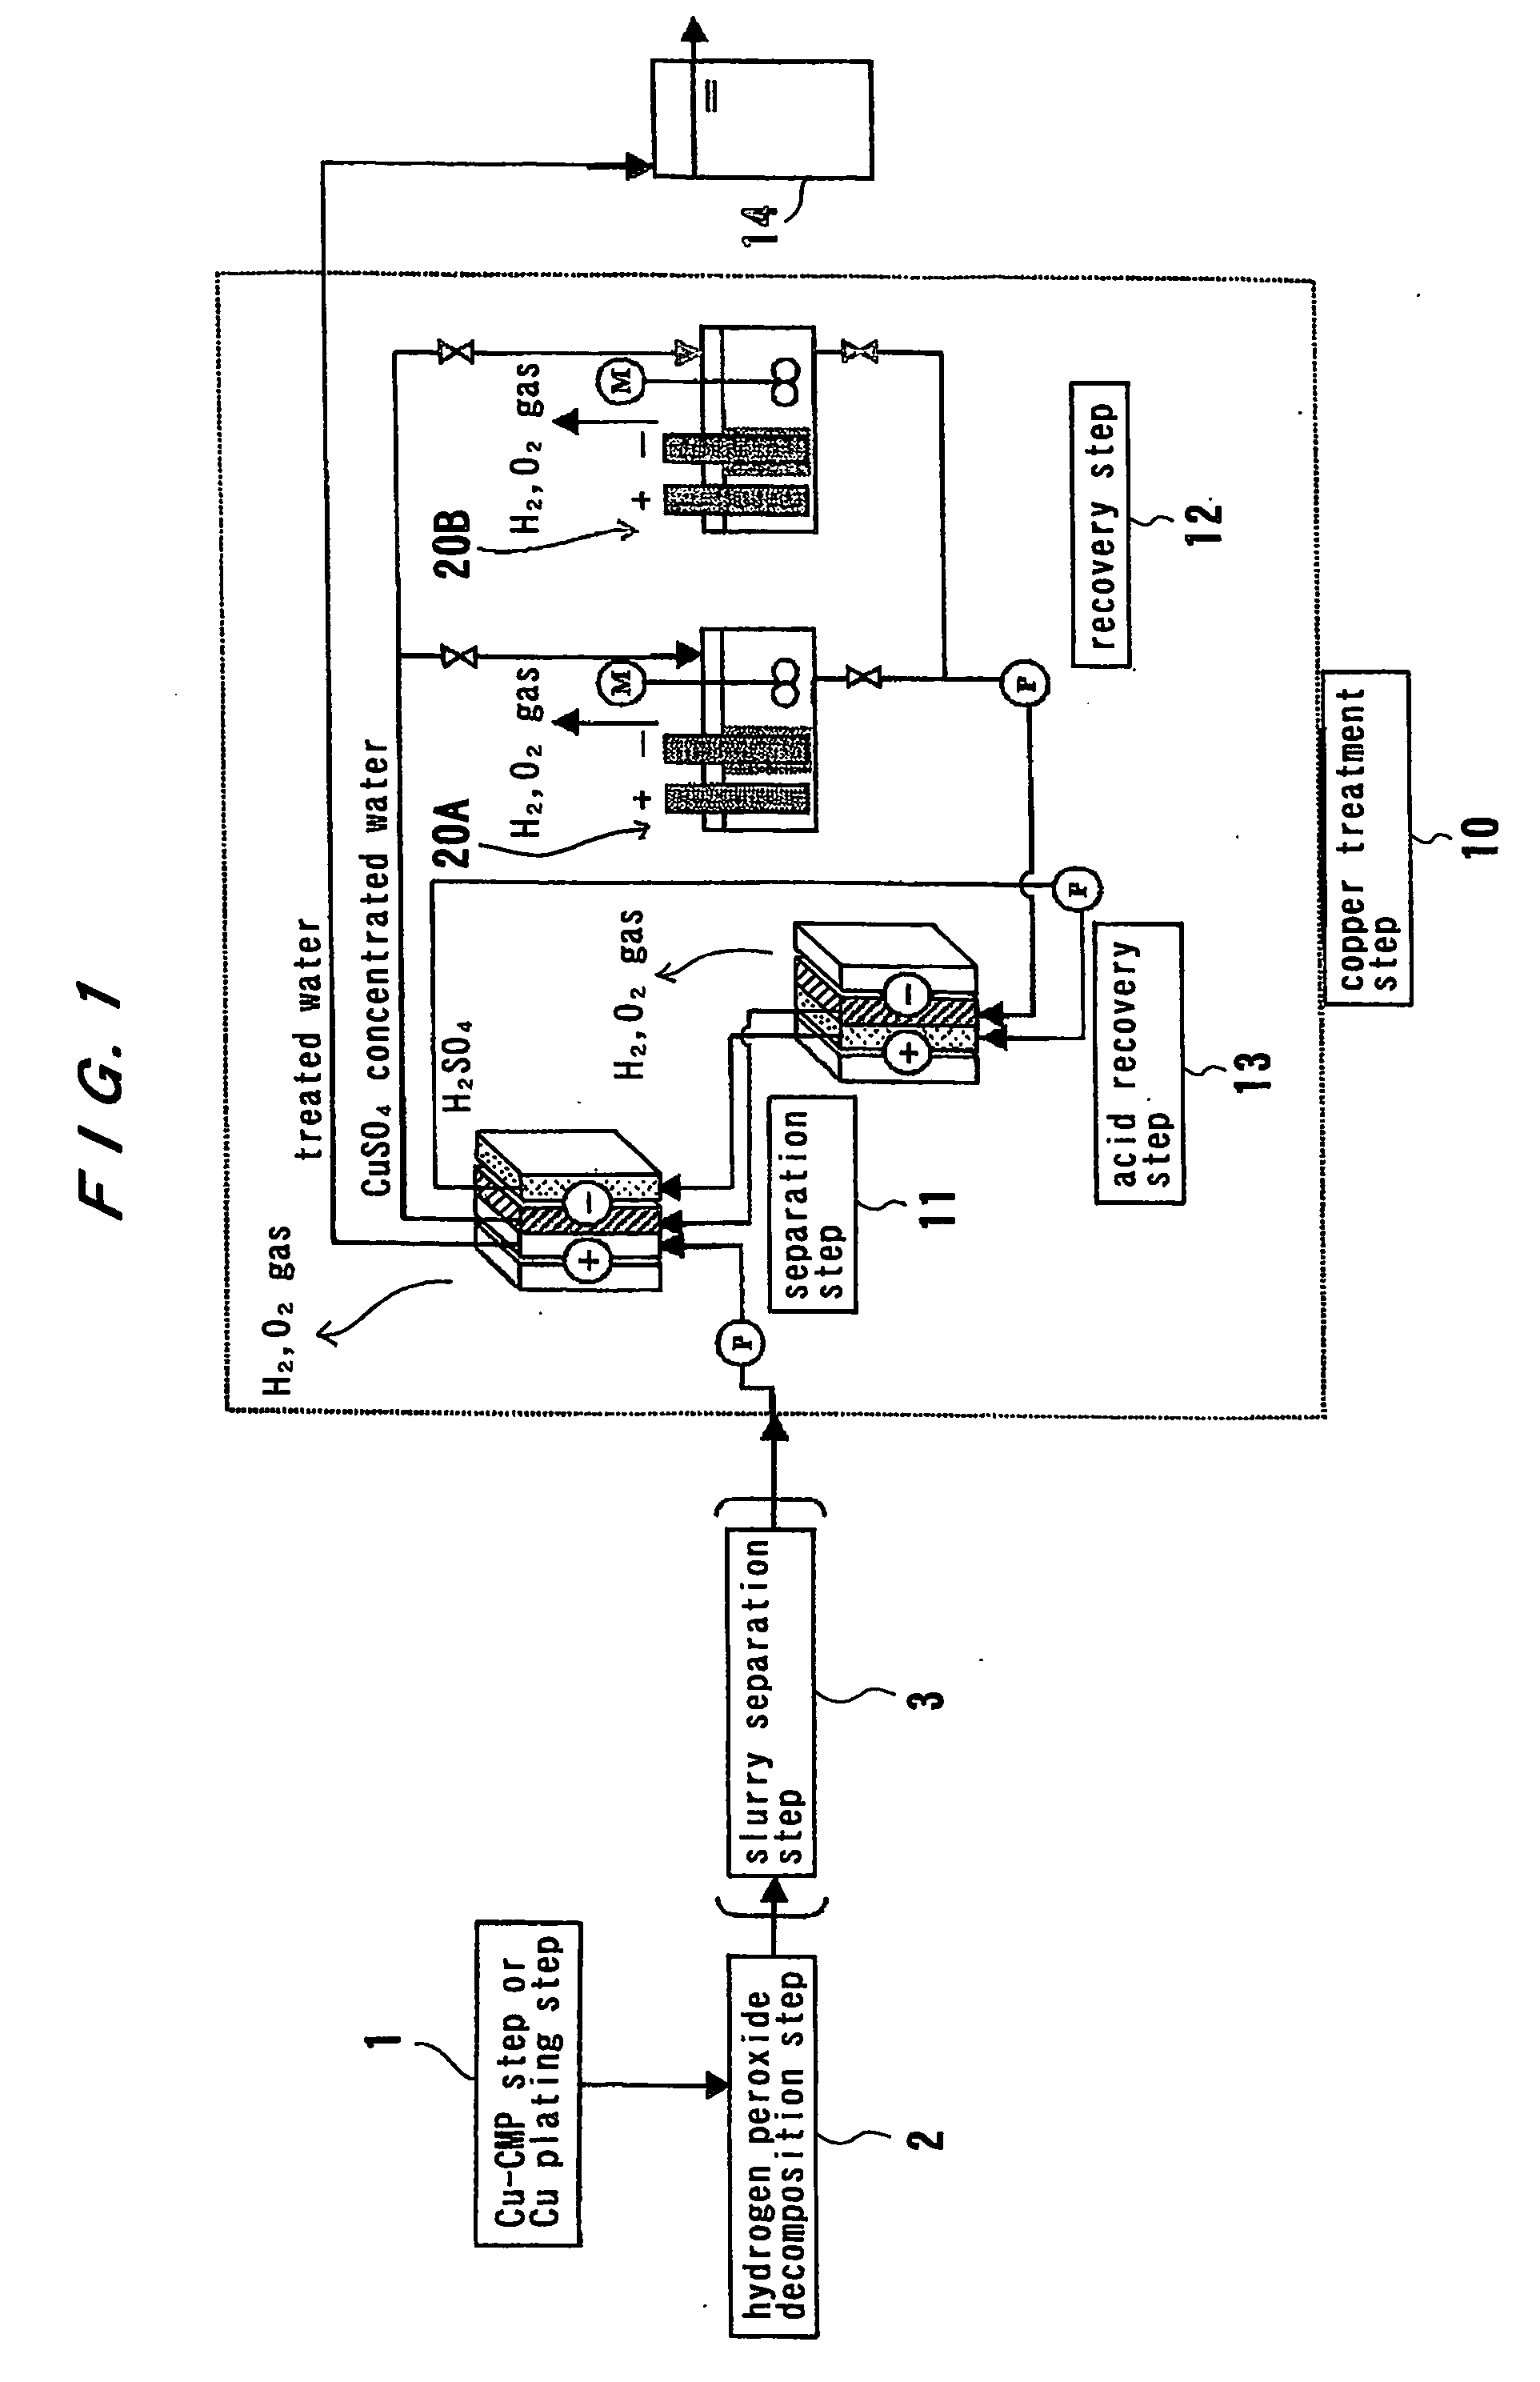 Method and apparatus for treating waste water